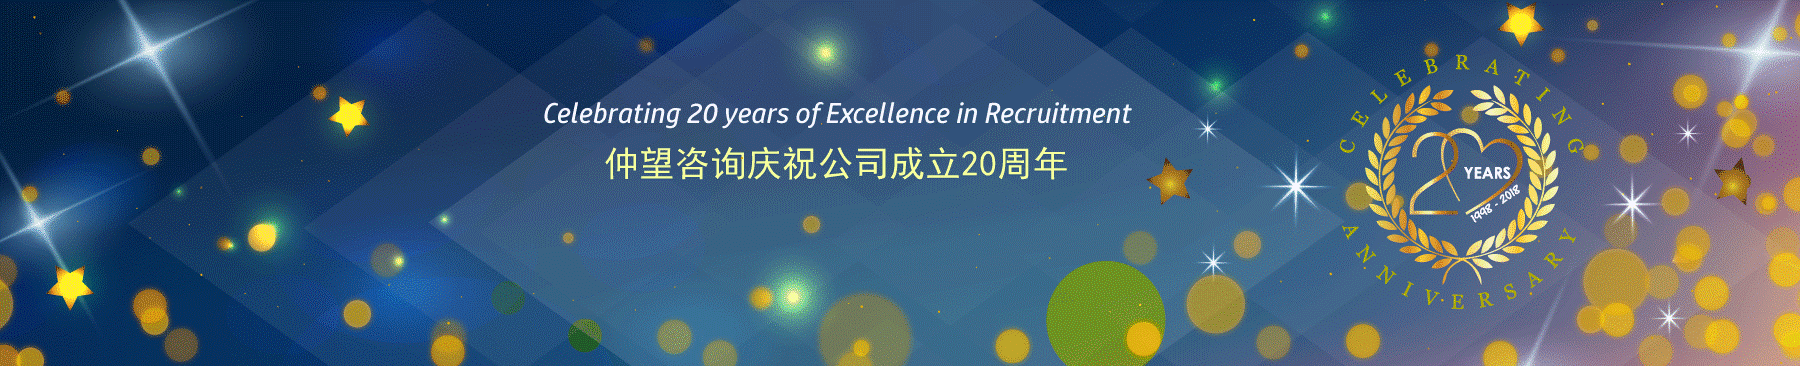 ZW HR Consulting – InterSearch China celebrates the 20th anniversary